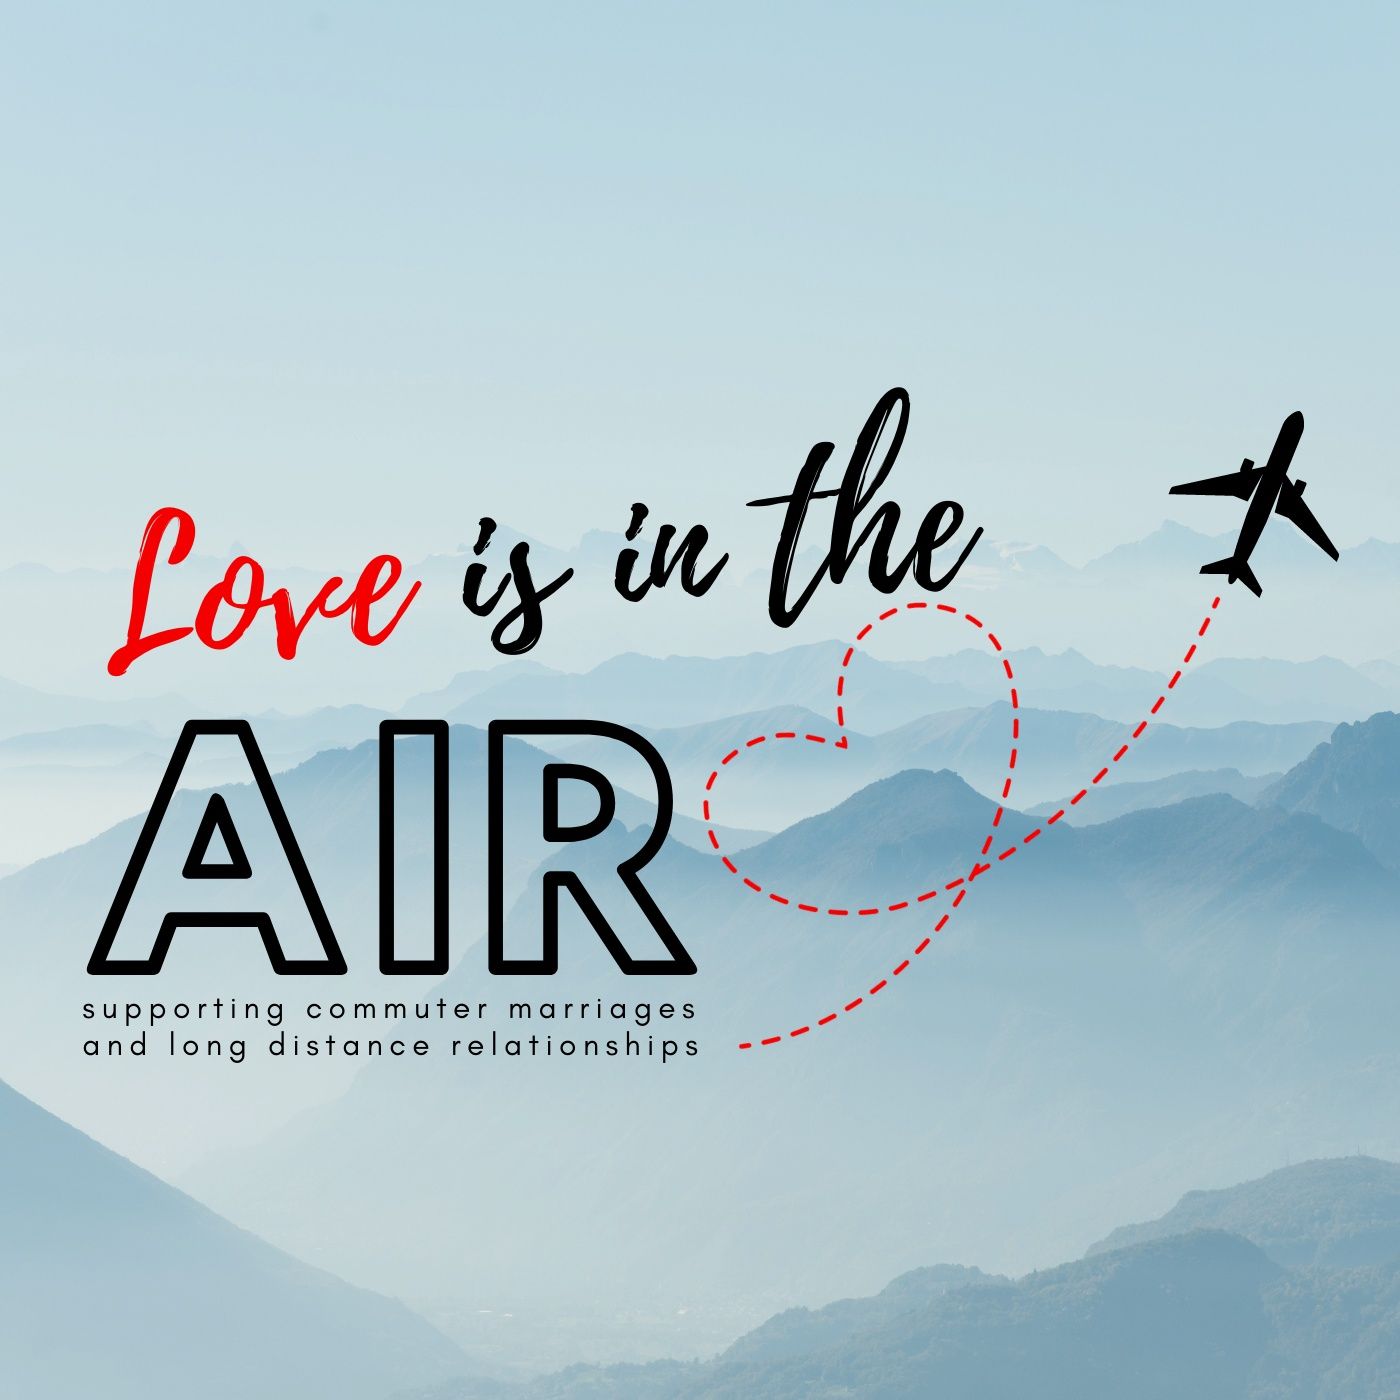 Аир лов. Love is in the Air. Air "Love 2, CD". Дщму шы шт еру ФШК the Air. Love is in the Air реклама.